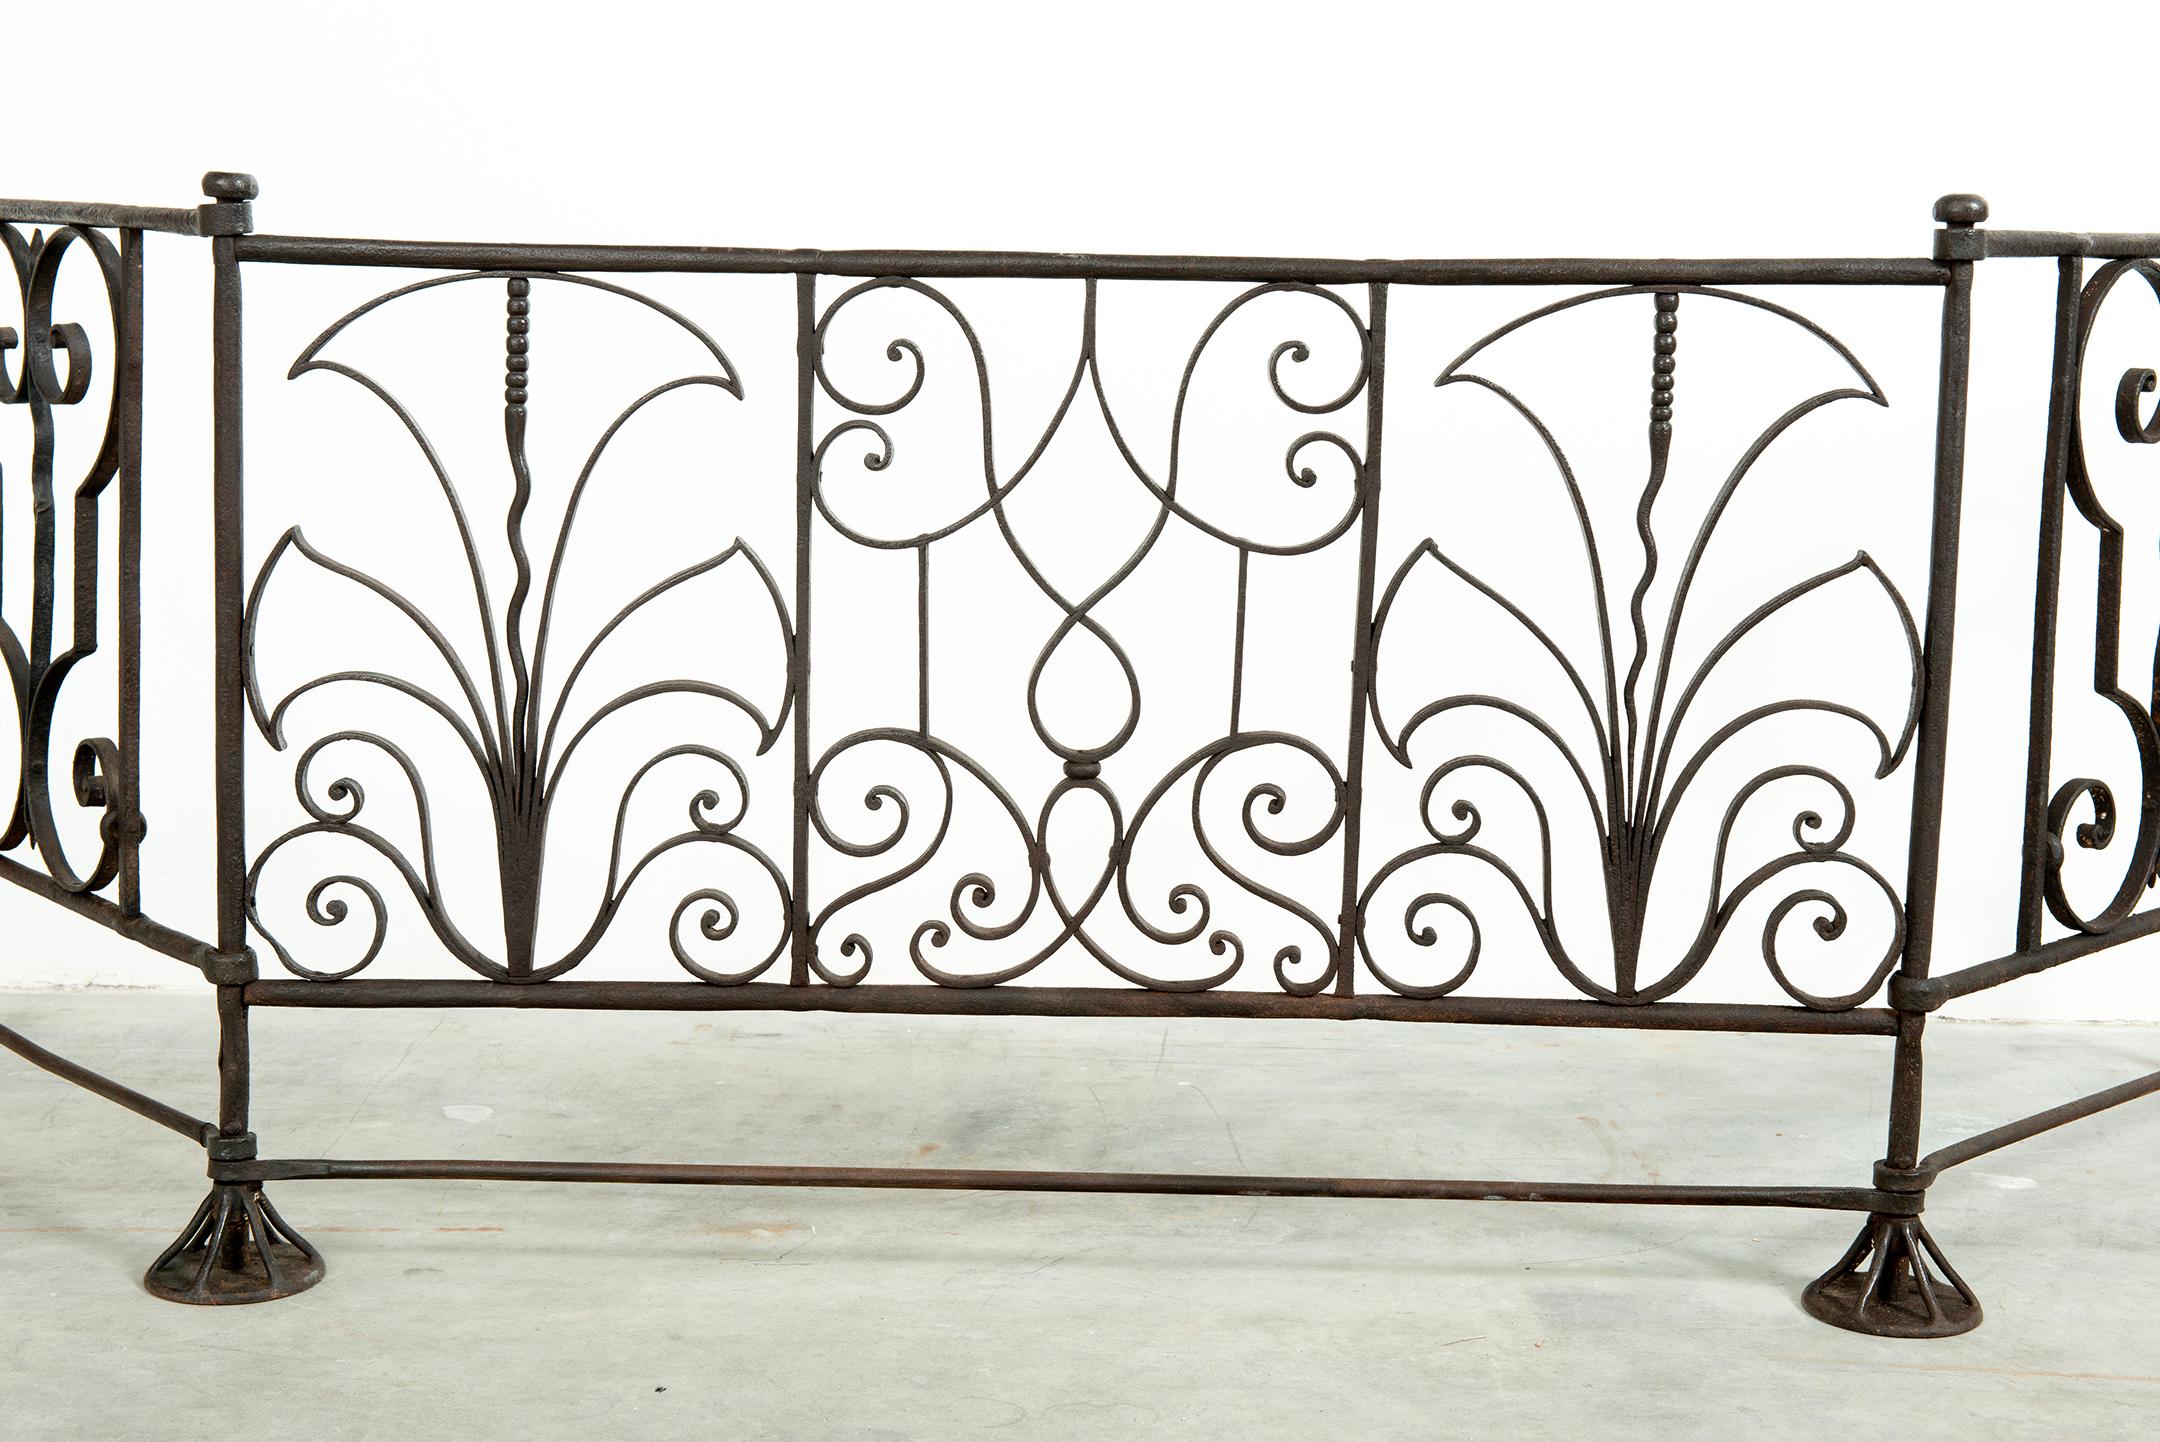 Iron Antique French Fireplace Screen / Gate For Sale